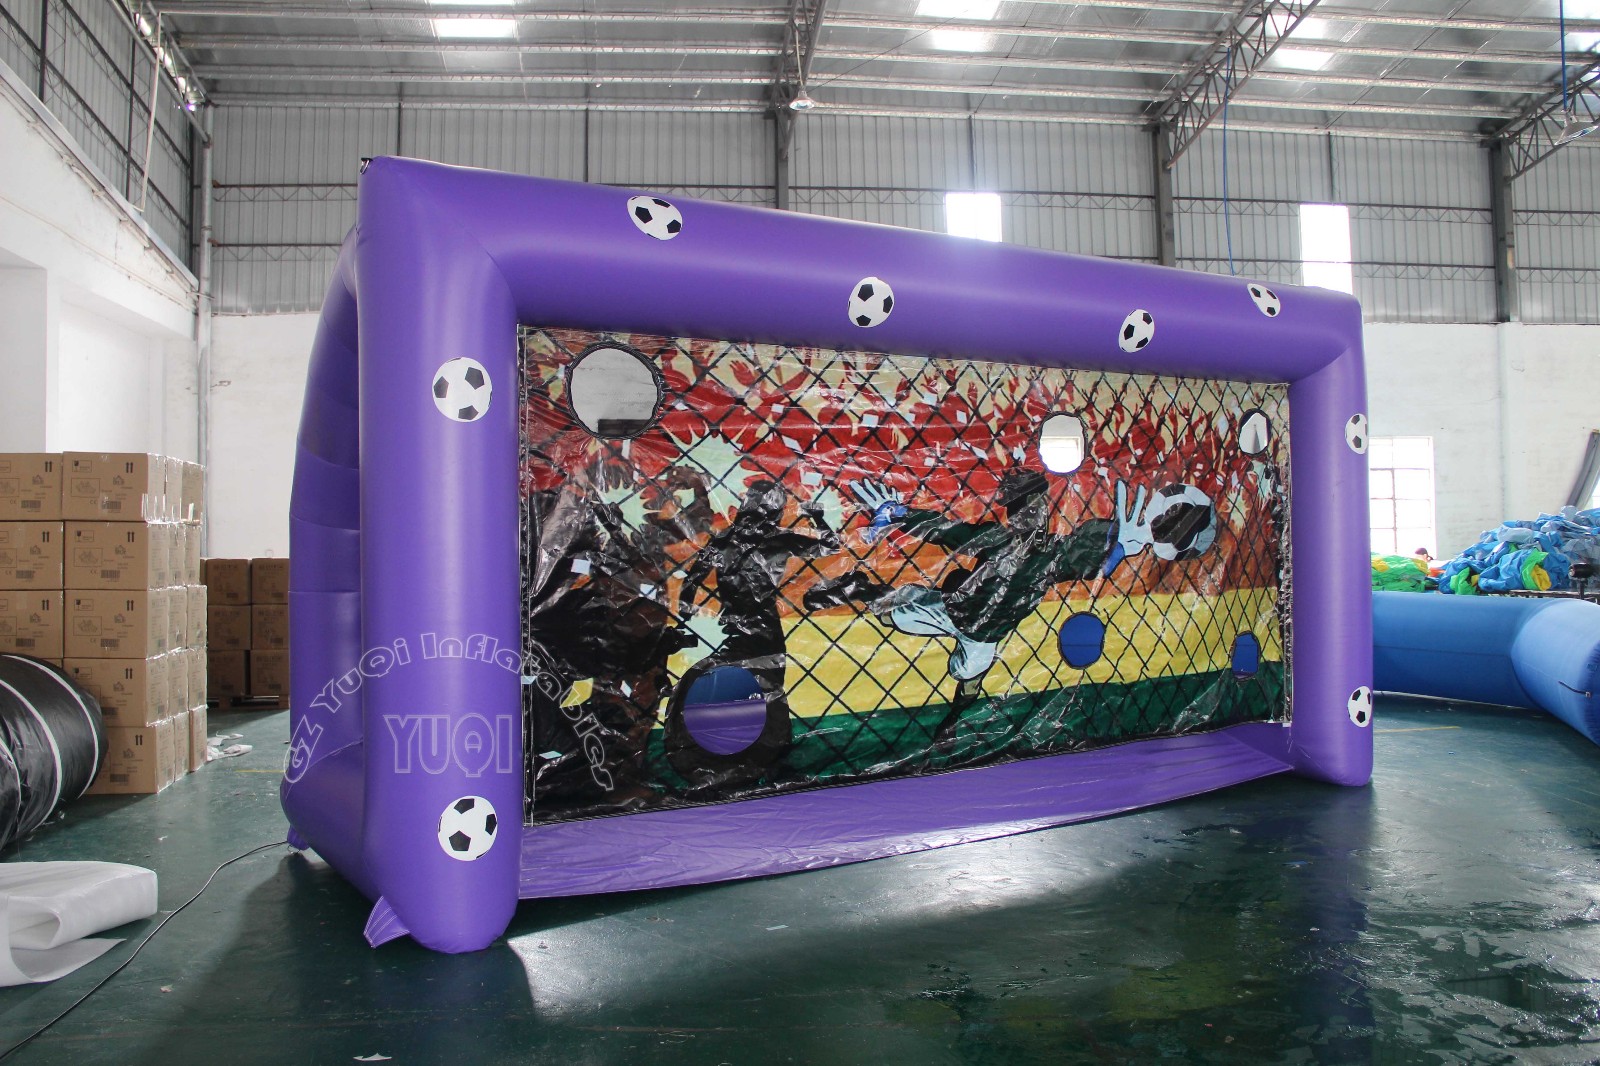 YUQI-Yq683 Inflatable Game Football Shoot Out Games On Sale